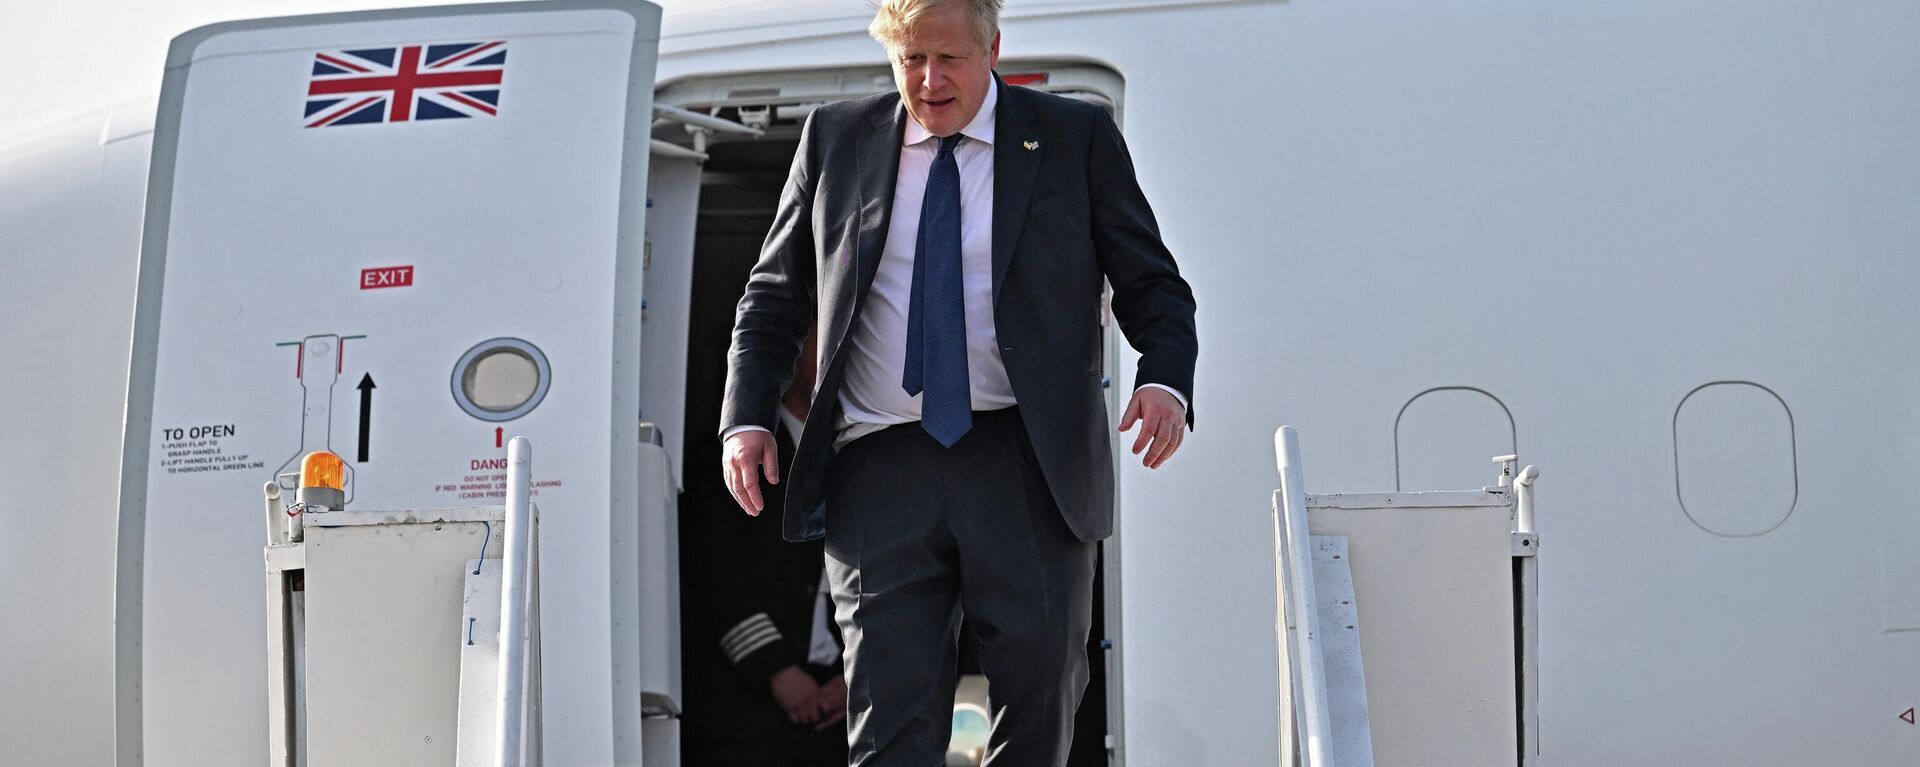 Britain's Prime Minister Boris Johnson disembarks from a plane upon his arrival at the airport in Ahmedabad on April 21, 2022 - Sputnik International, 1920, 22.04.2022